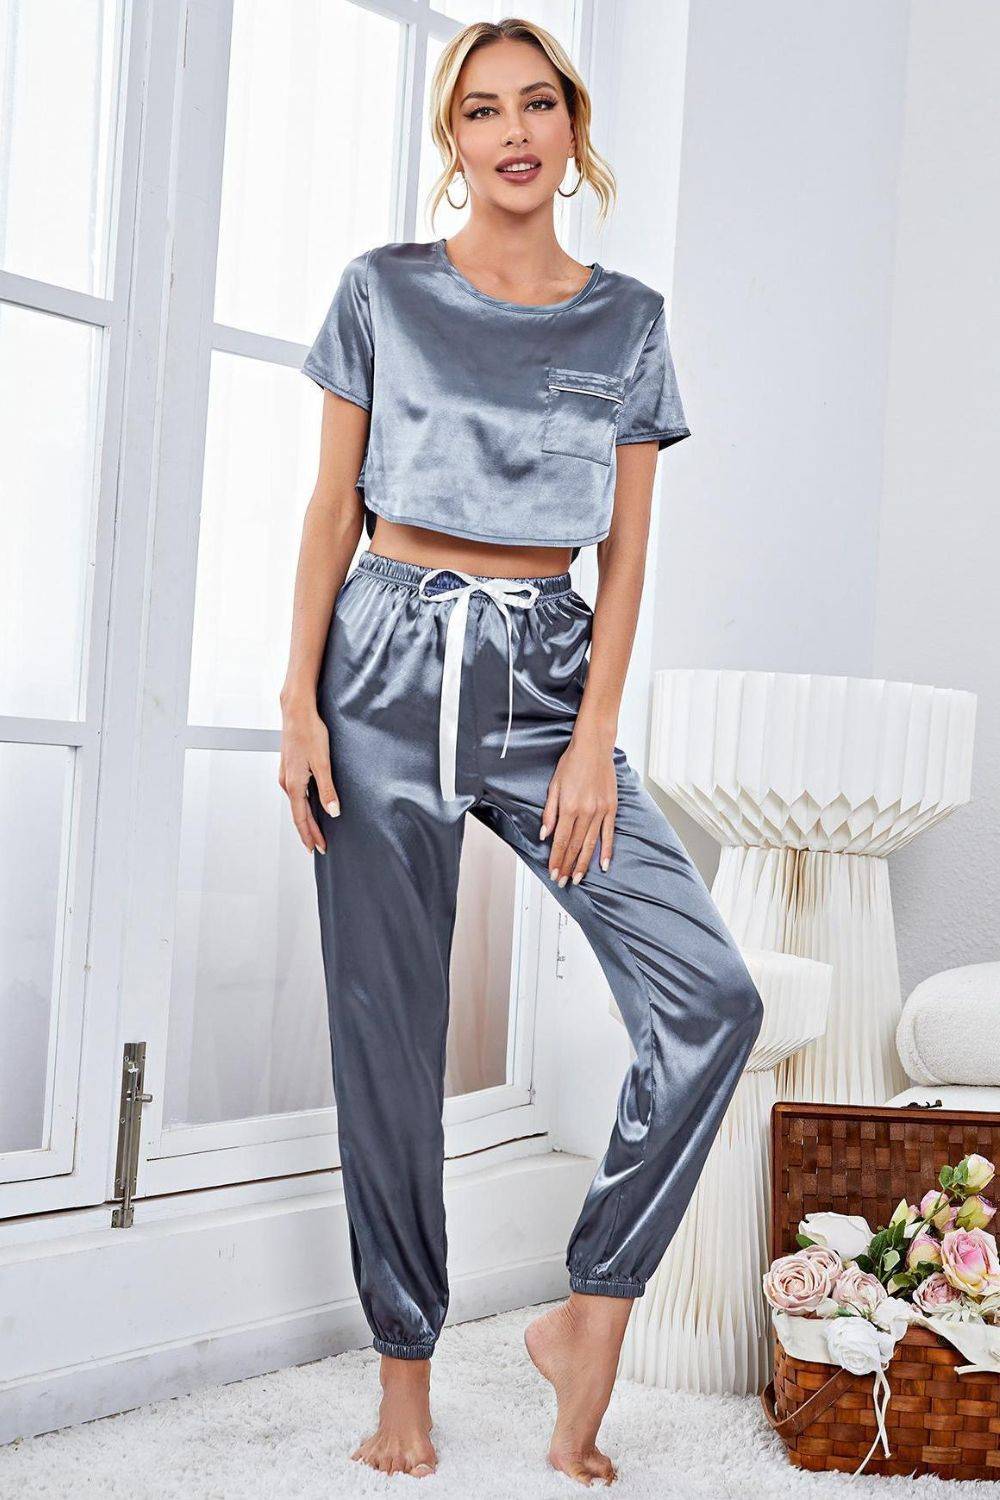 a woman wearing a silver top and matching pants